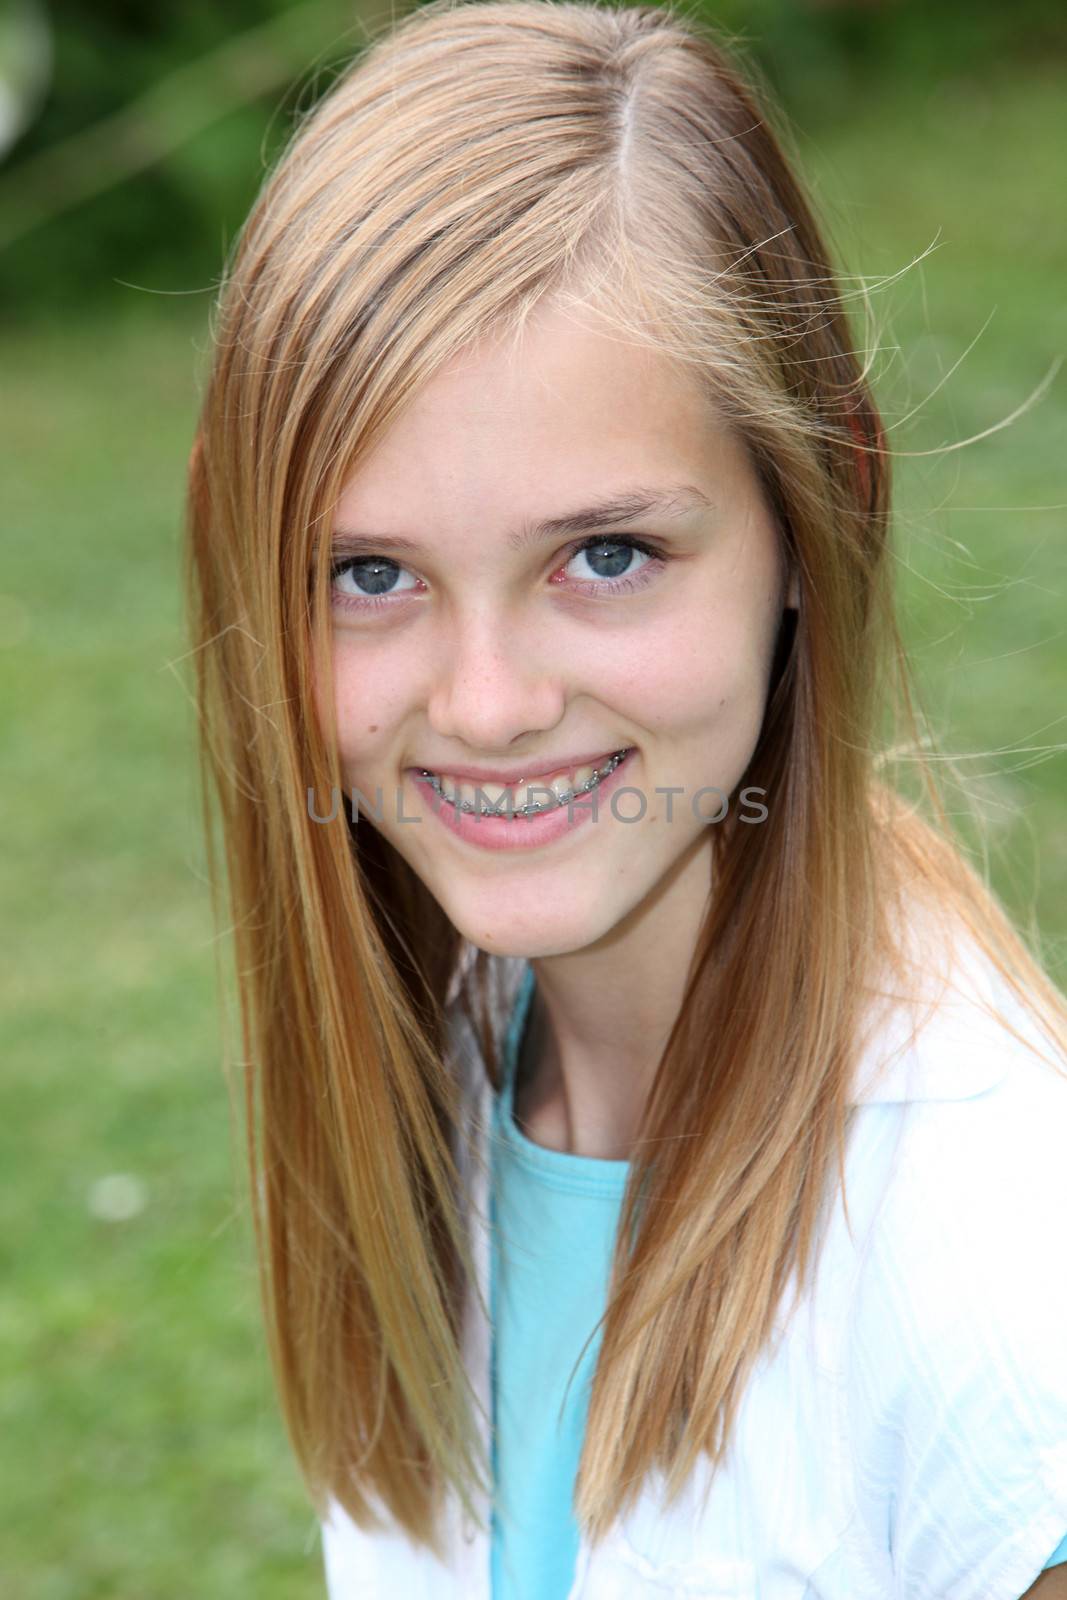 Smiling attractive young teenage girl with long blond hair and braces on her teeth looking at the camera